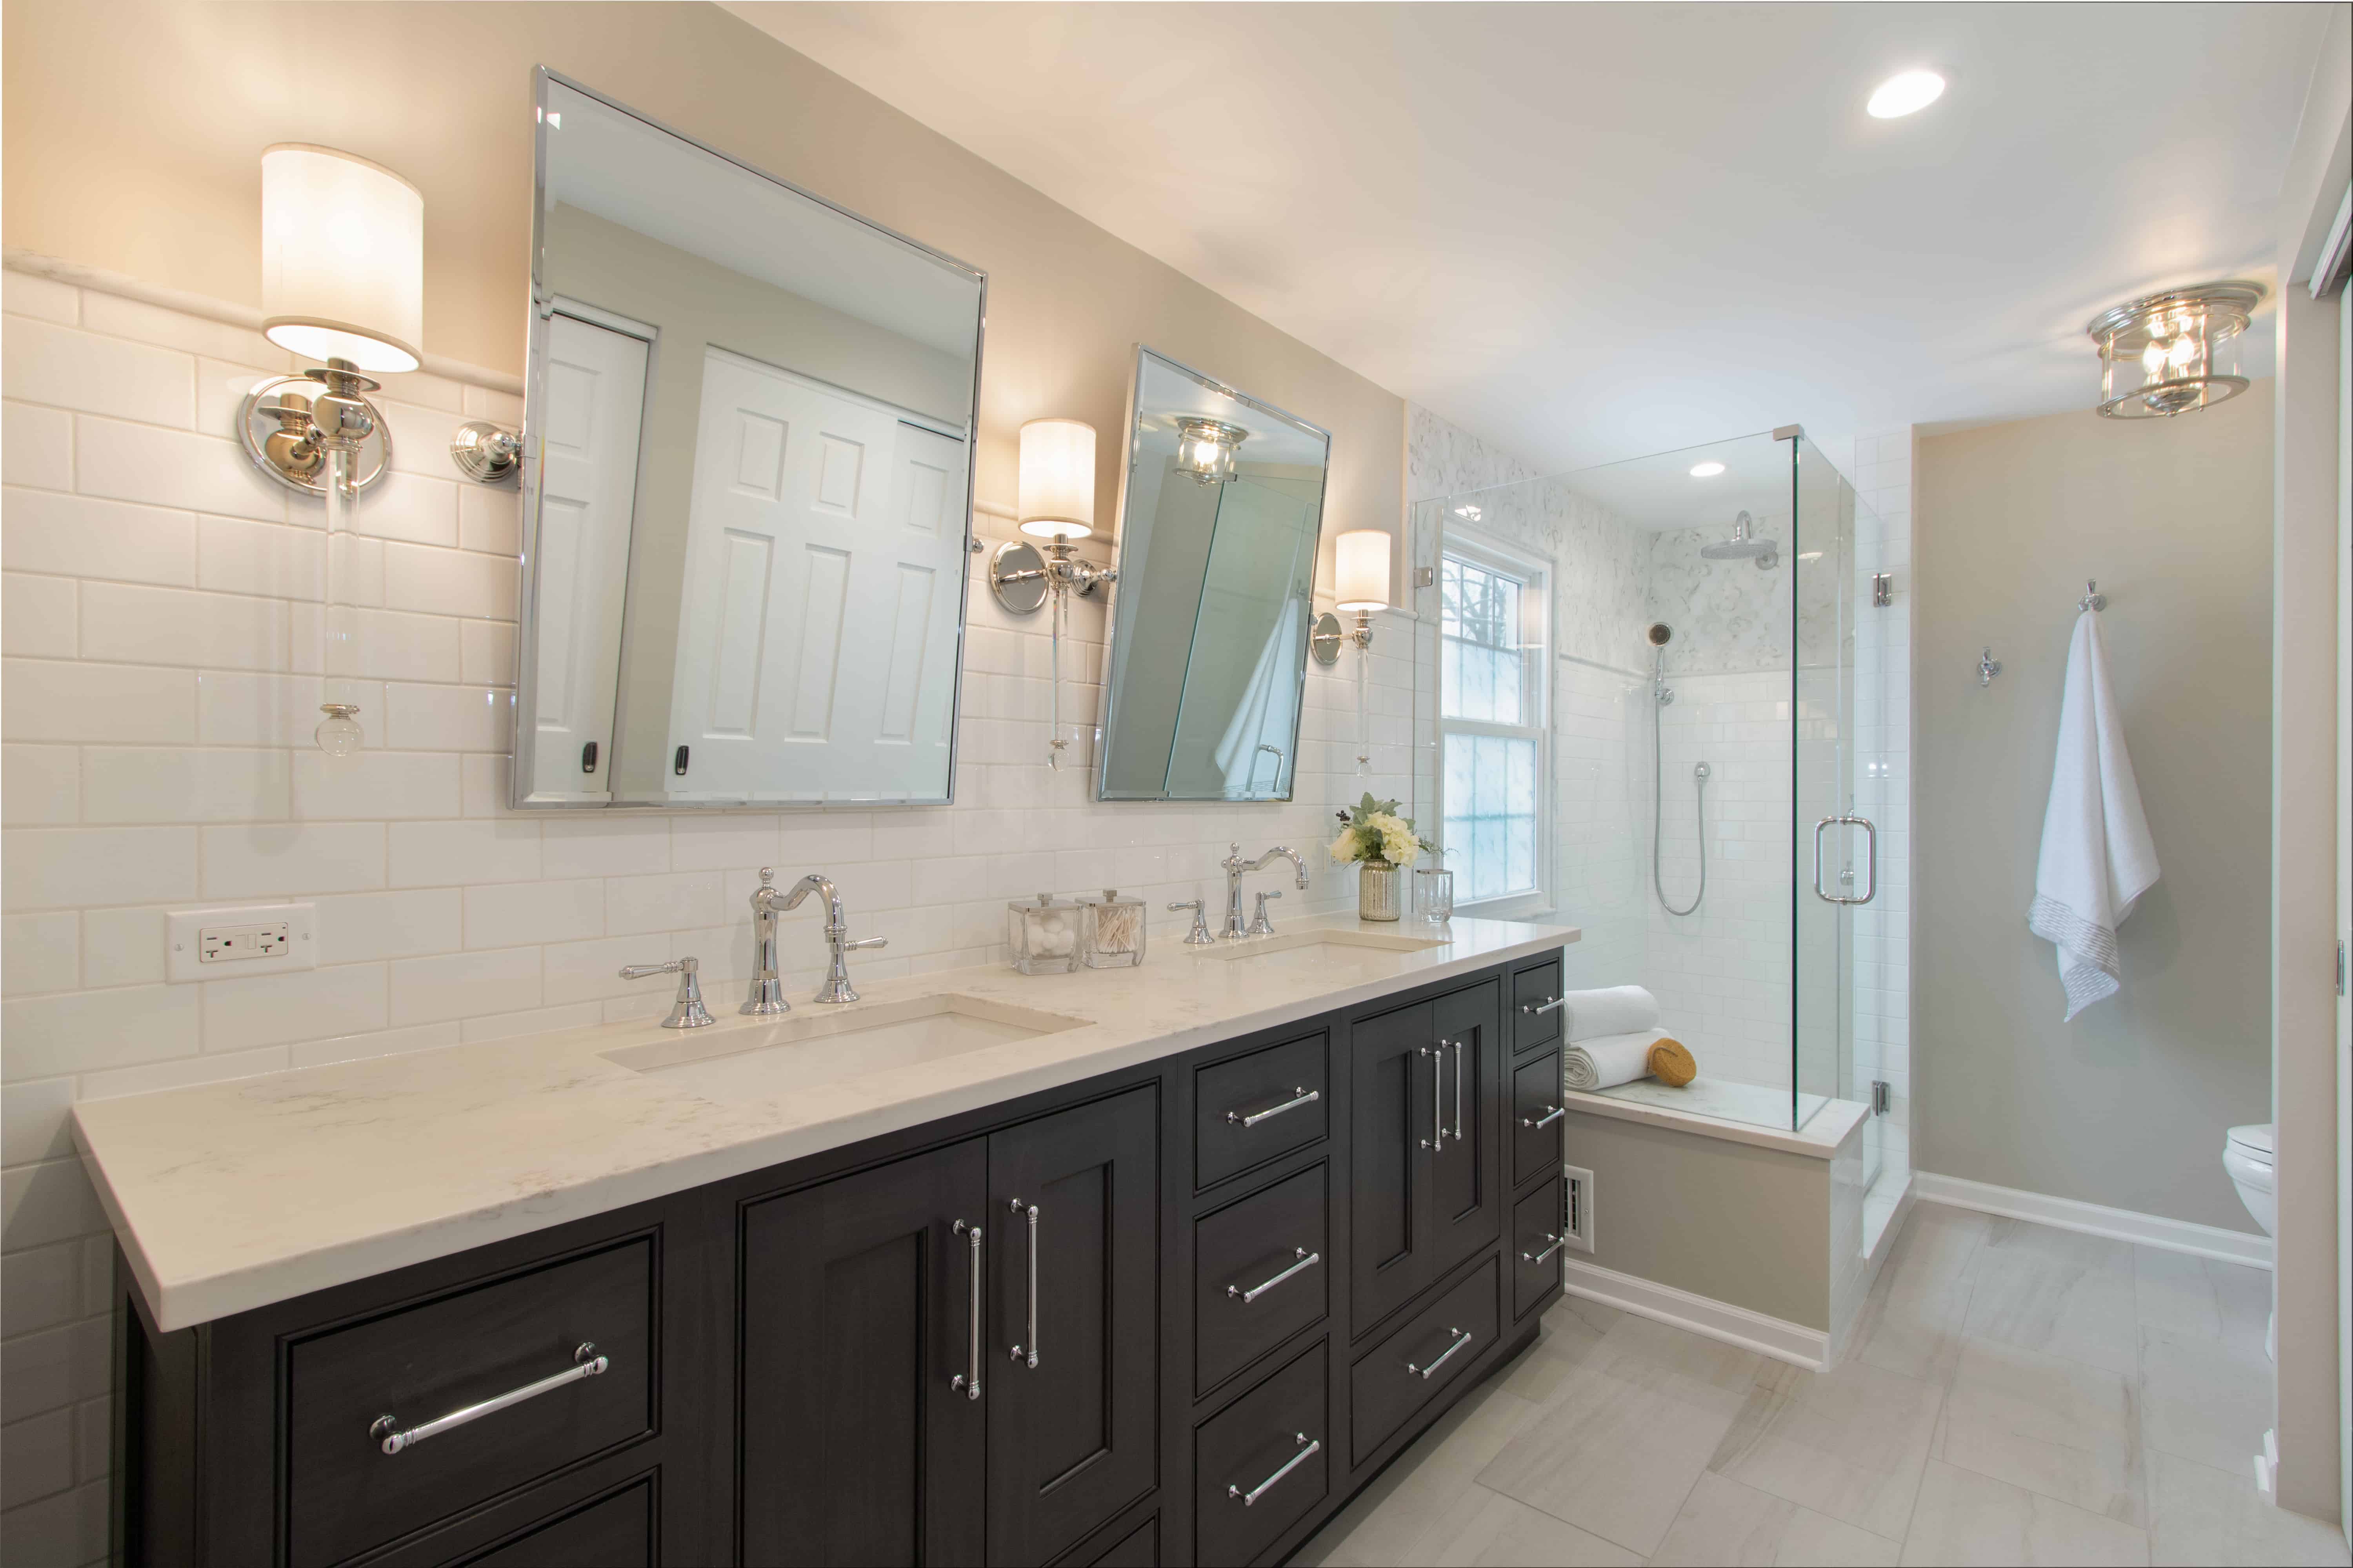 Bathroom remodeling project in Palatine, Illinois